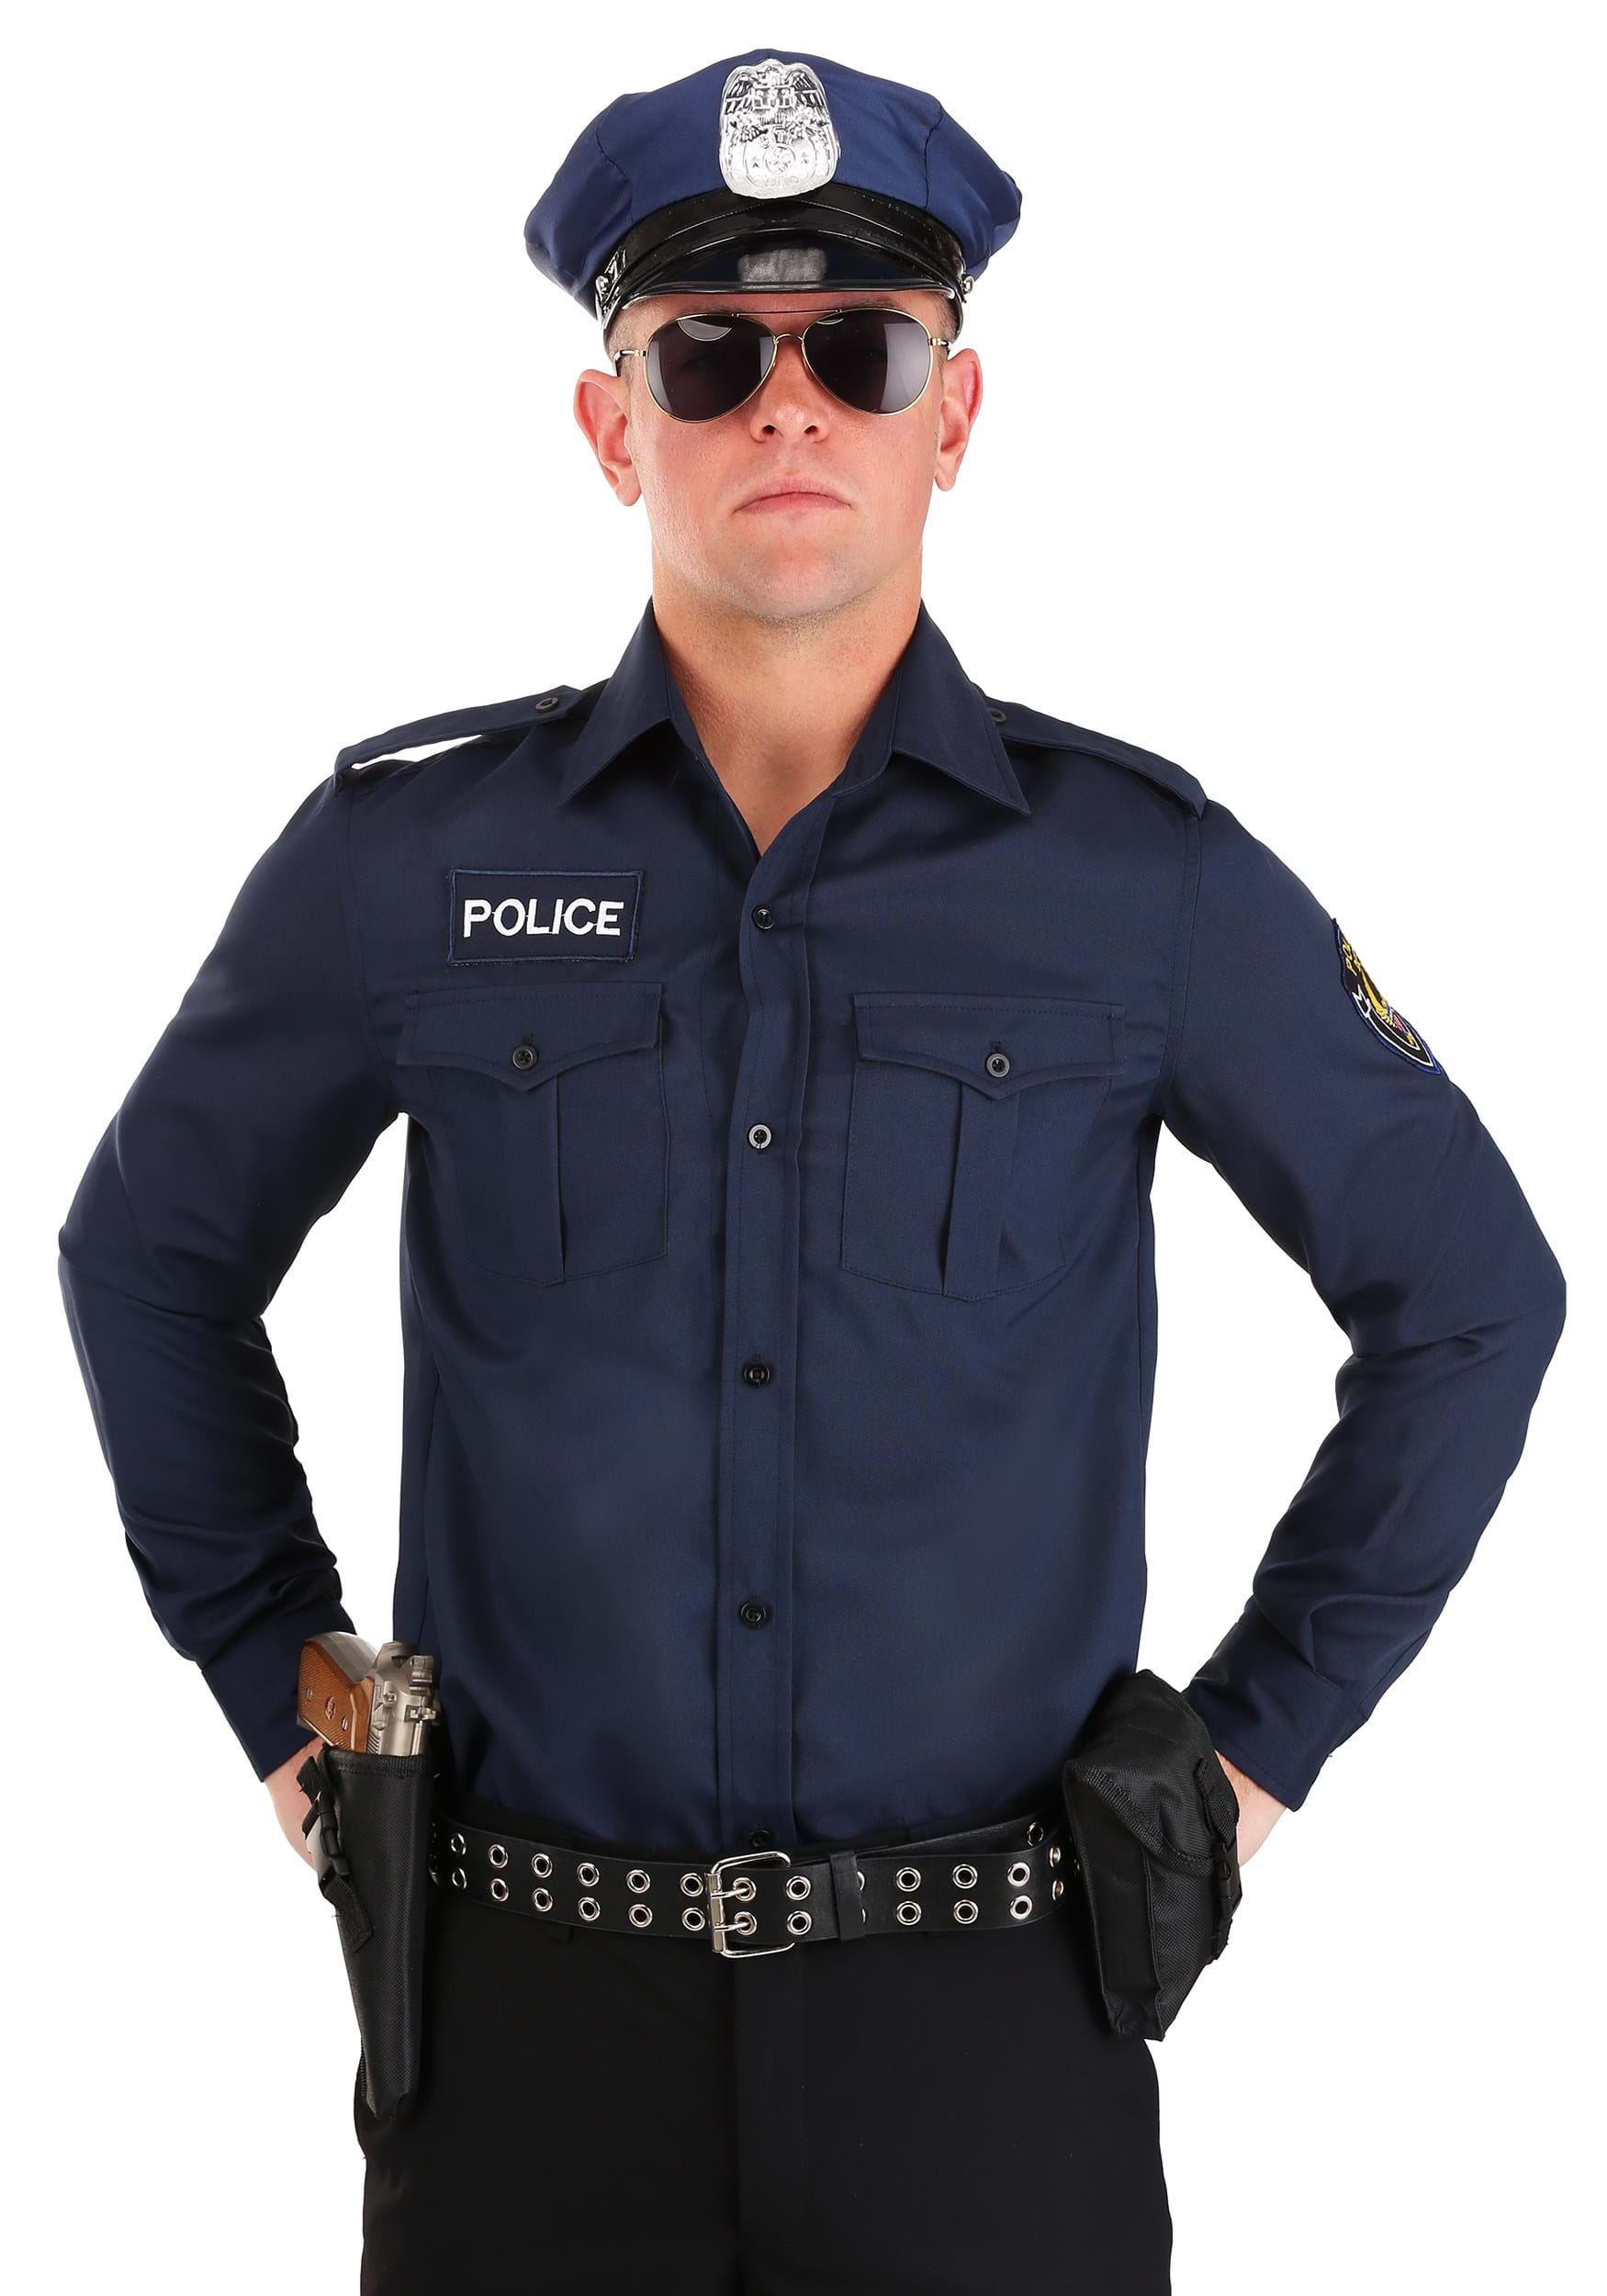 https://images.halloweencostumes.com/products/10945/1-1/police-utility-belt-update.jpg